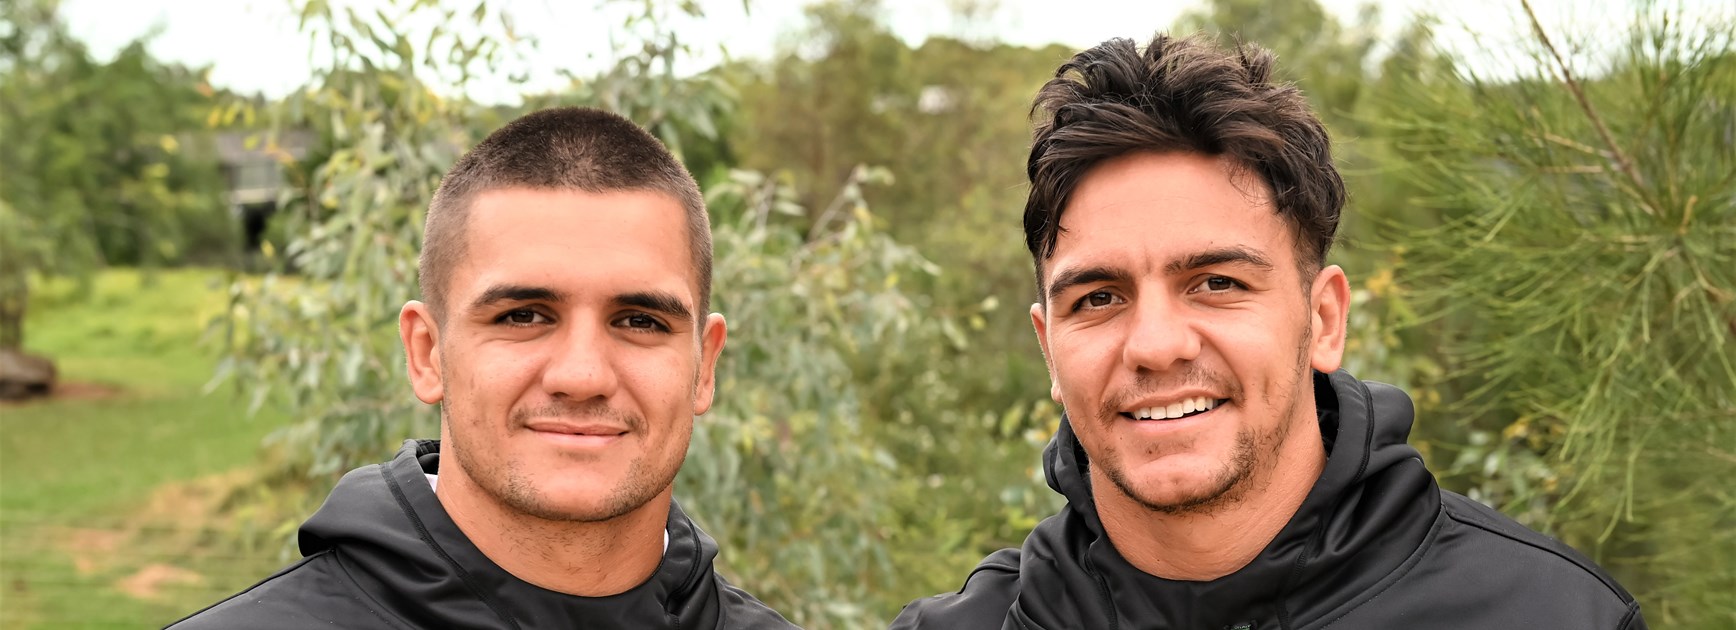 Jayden and Kodi Nikorima will play their first match together since 2014